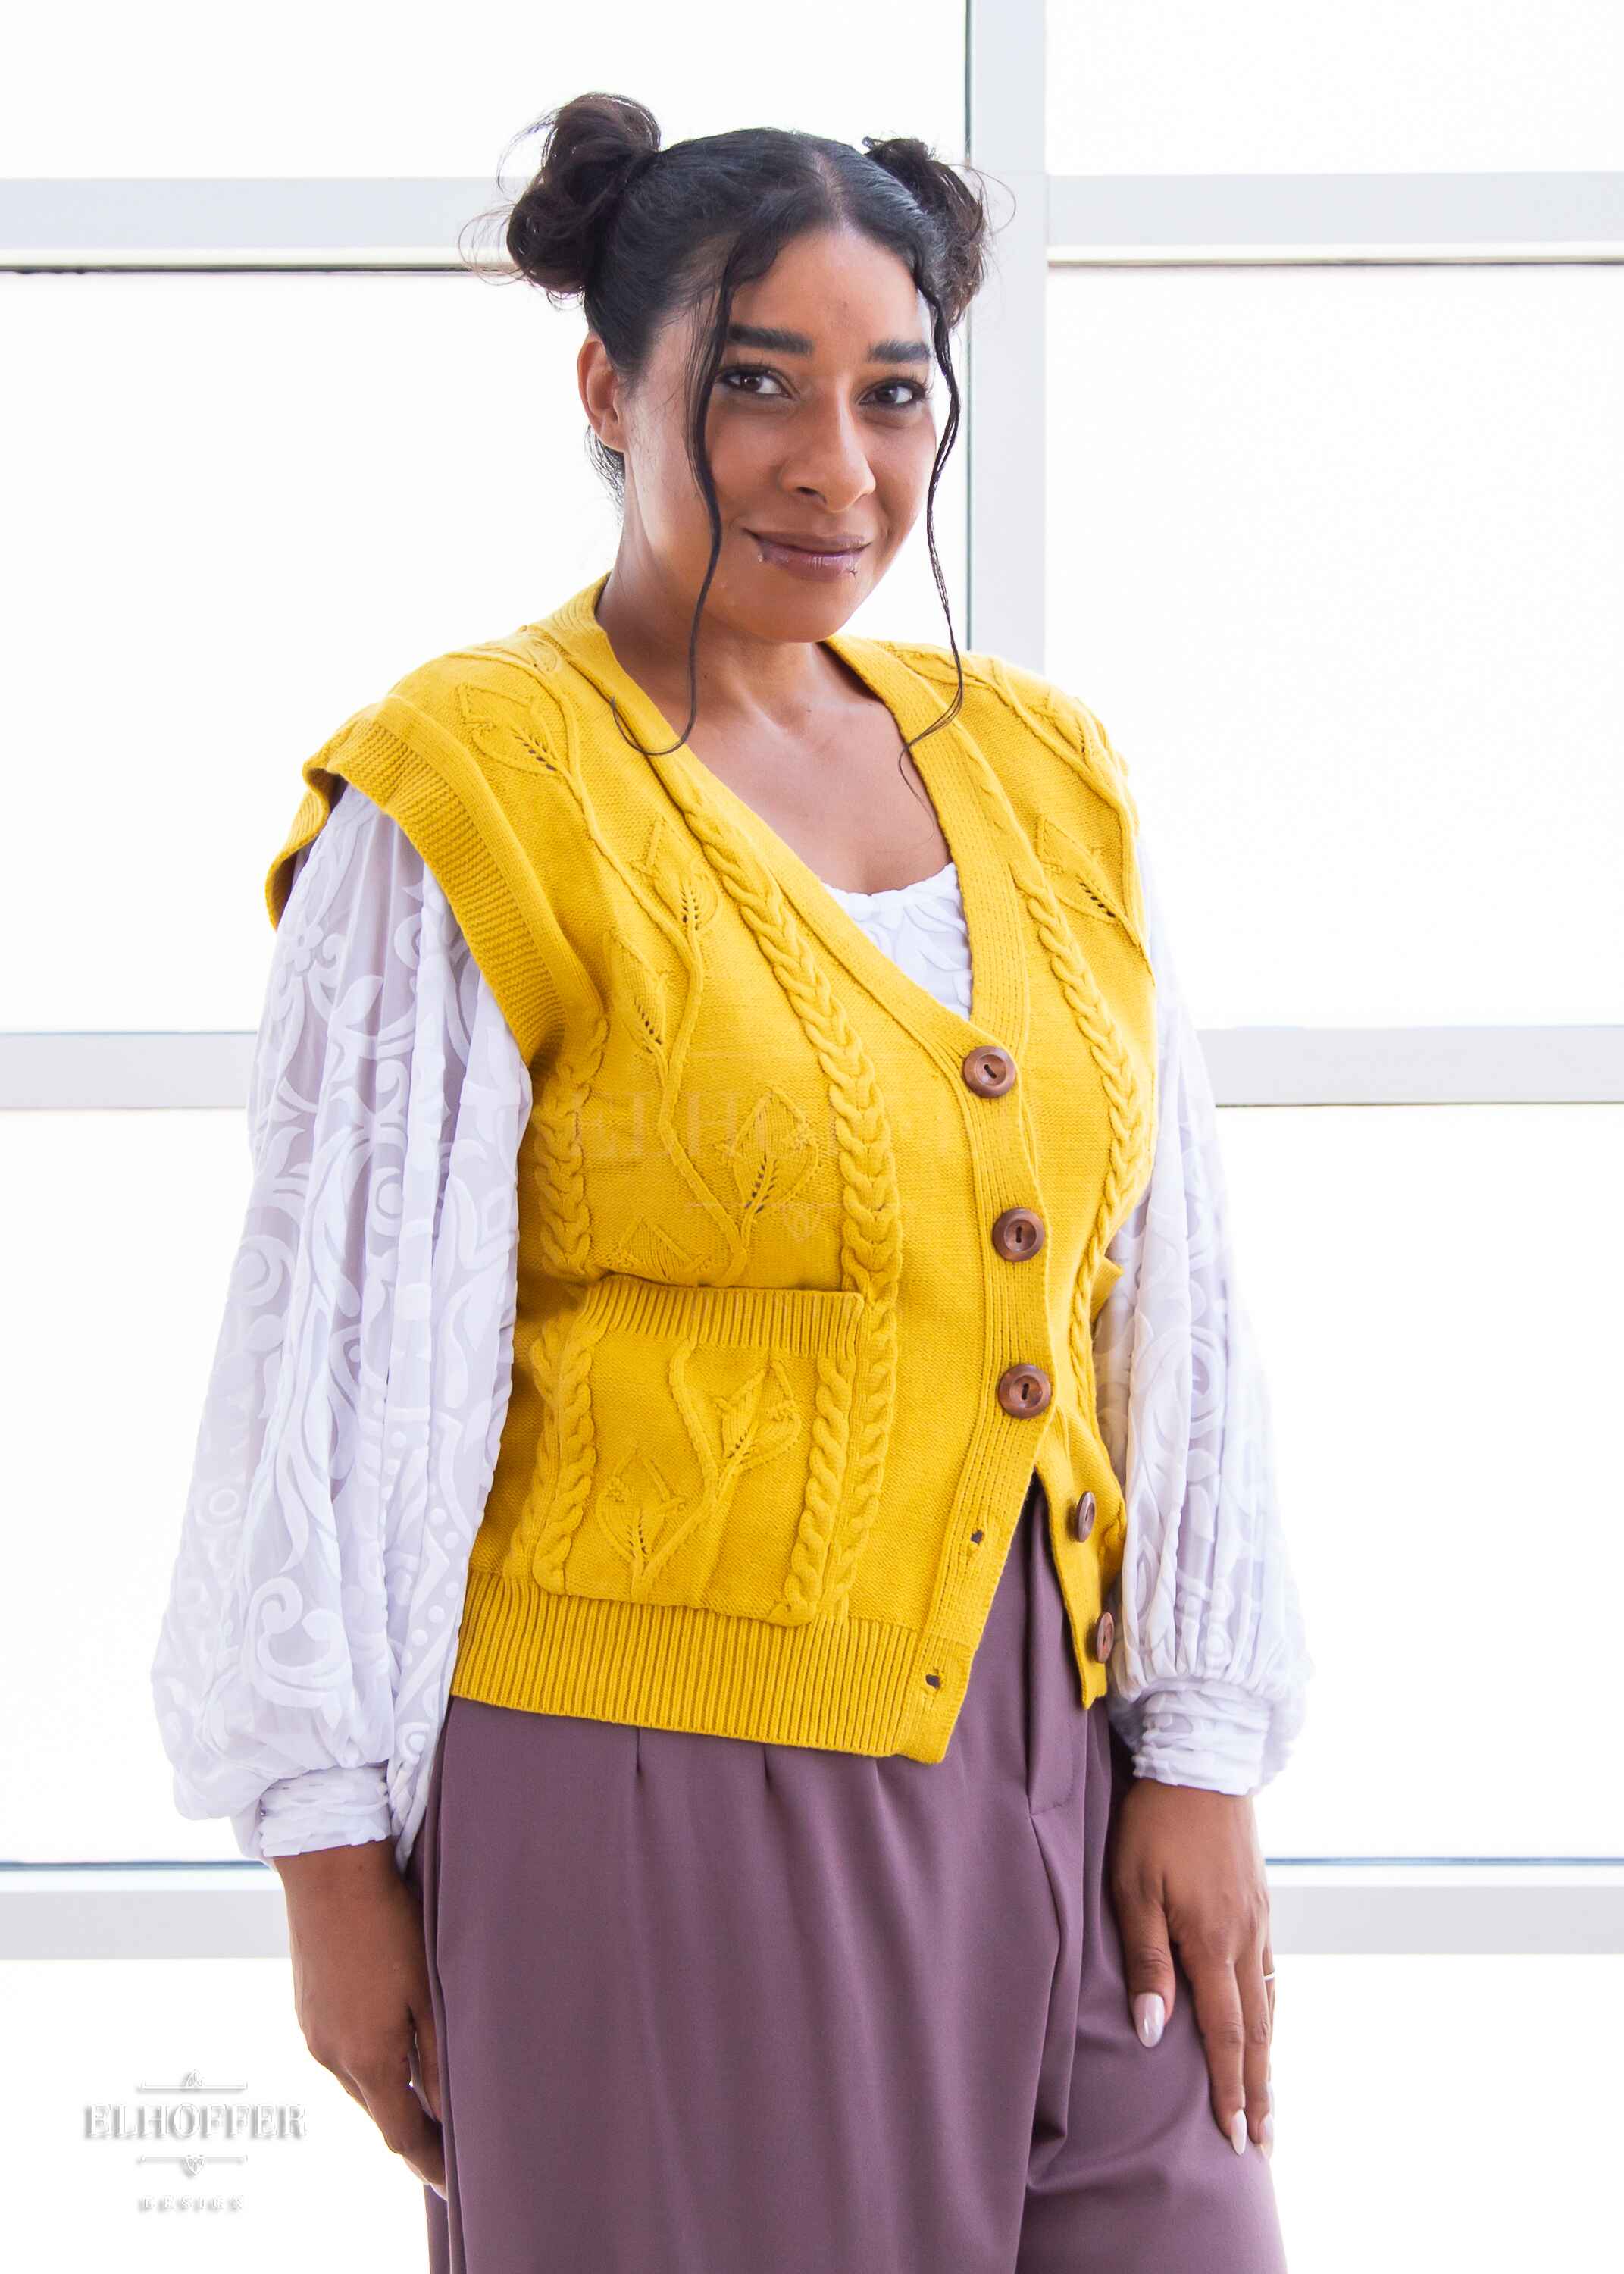 Janae, a light brown skinned L model with dark brown hair in space buns, is wearing a golden yellow button up knit vest with a leafy vine and cable knit pattern, light brown buttons, and front pockets. She paired the vest with a white burnout velvet top and mauve trousers.